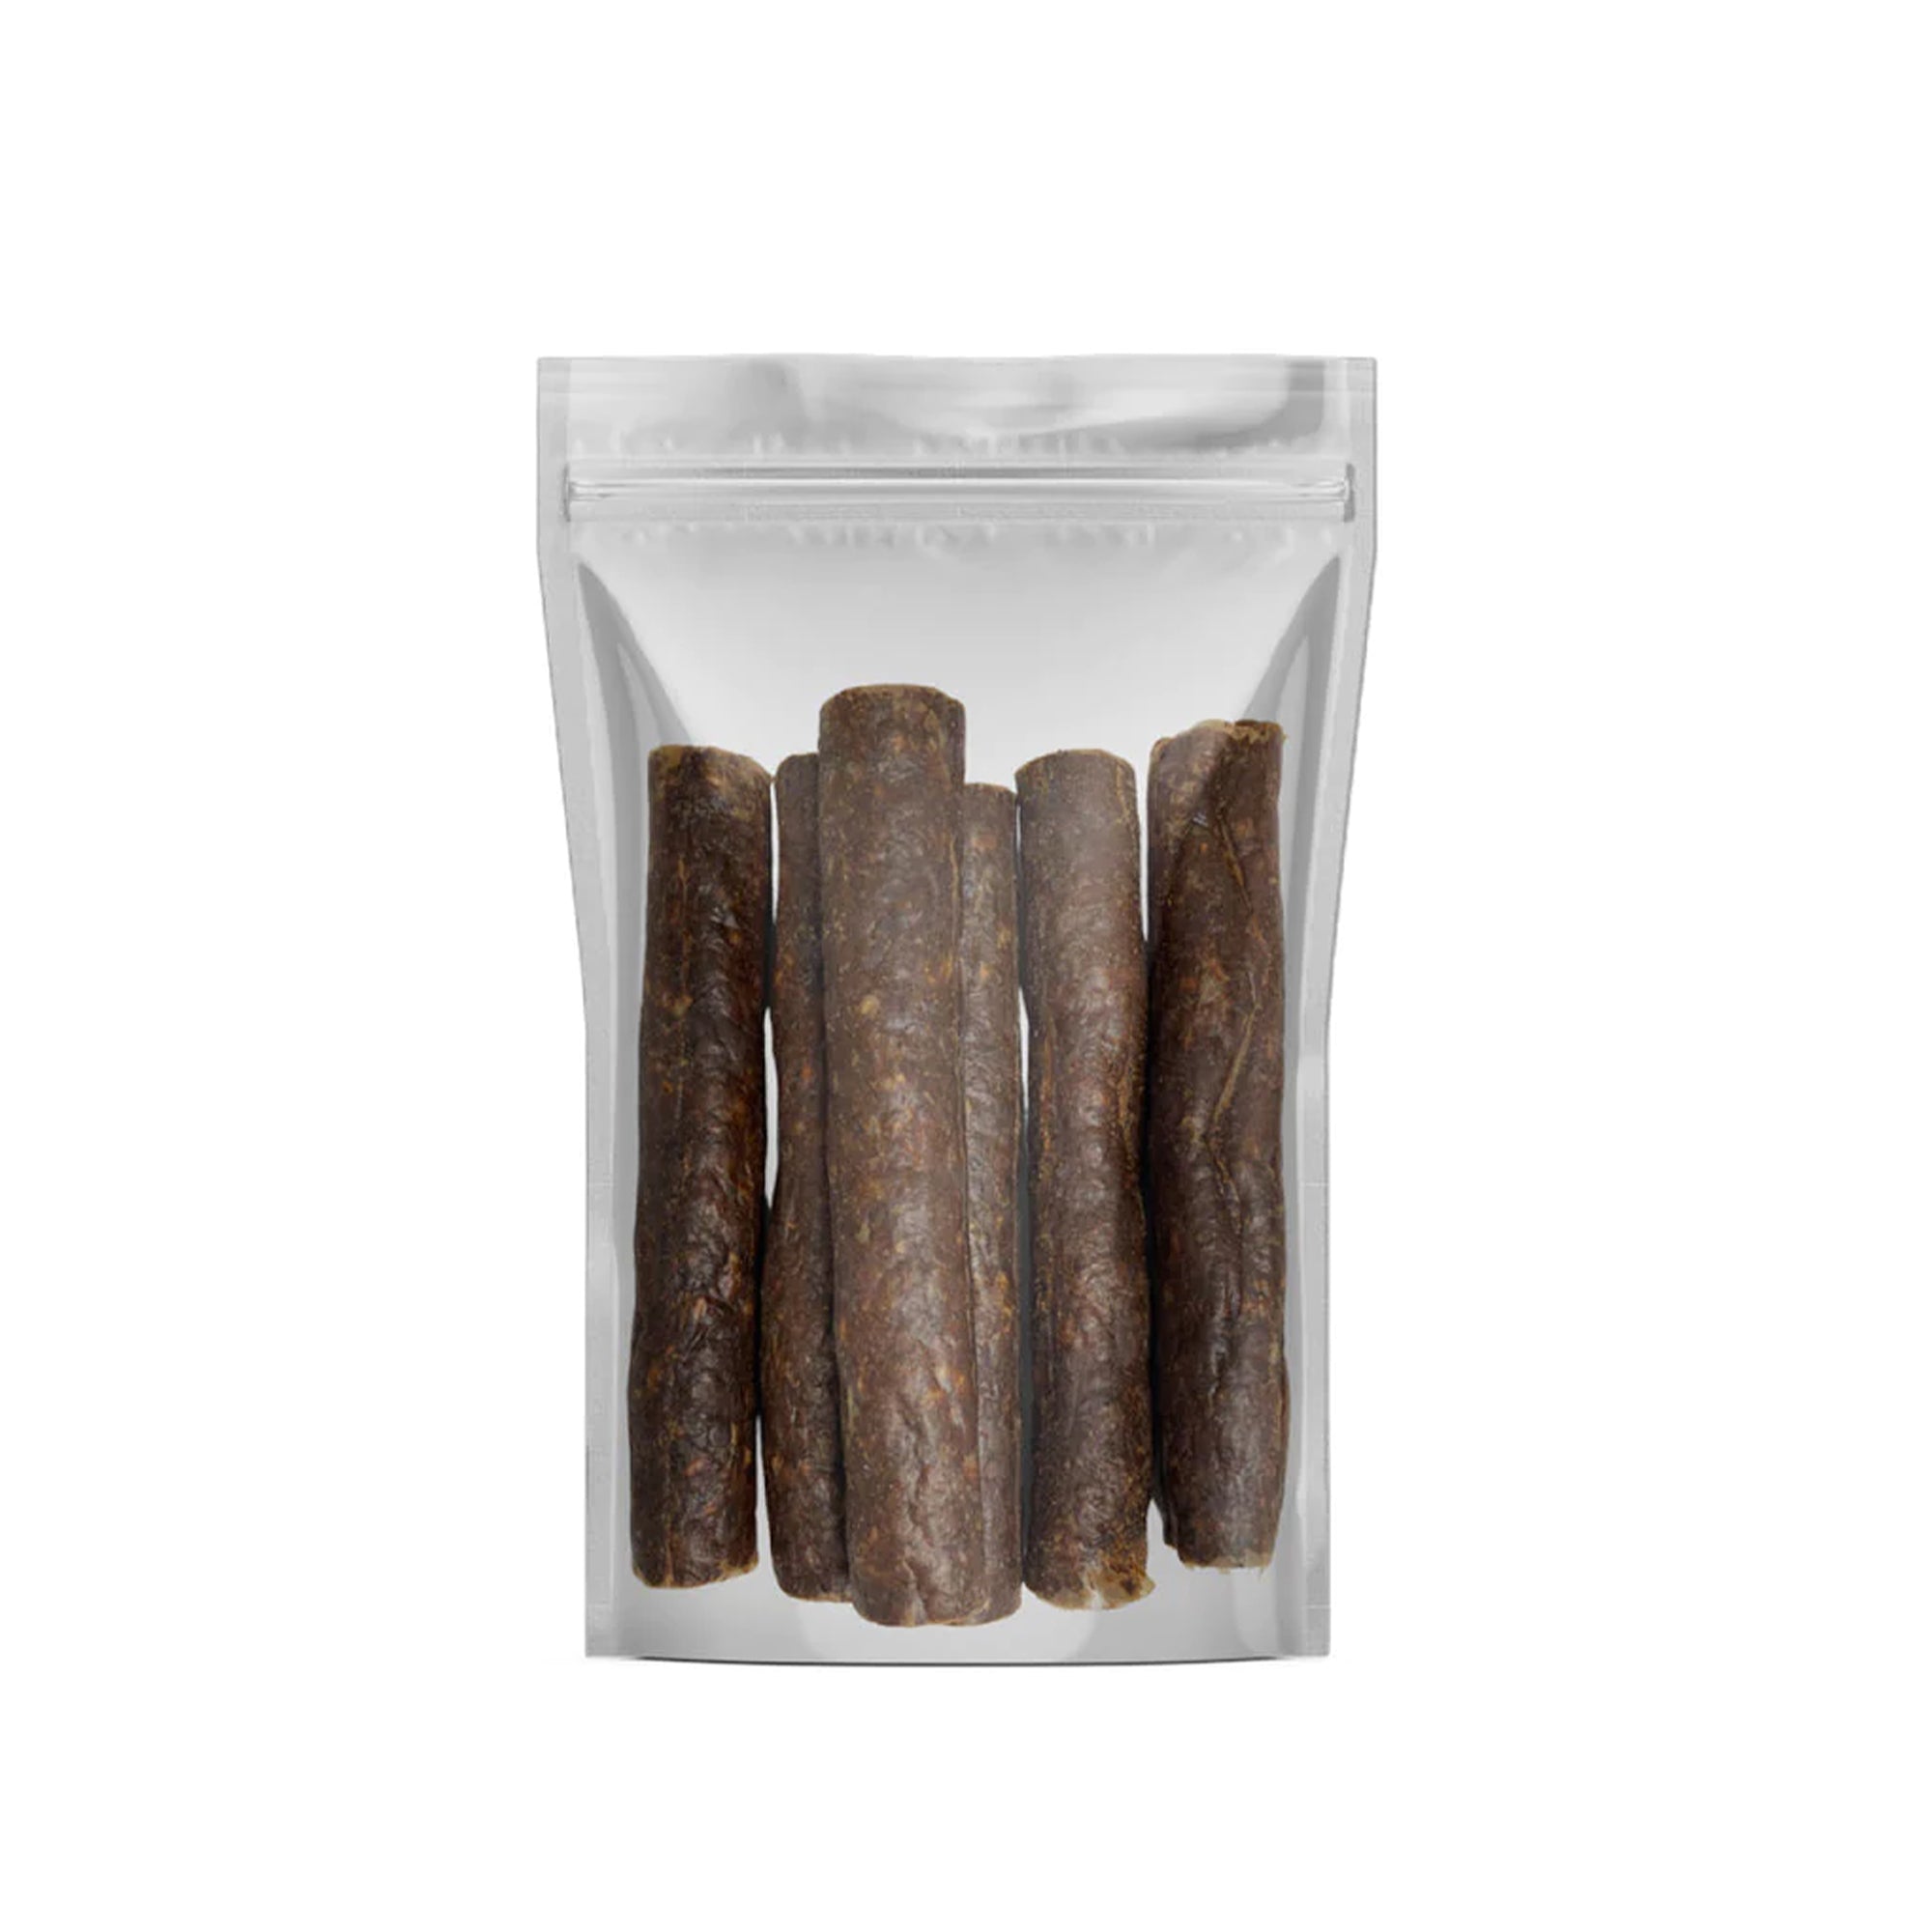 6” Beef Sausages - 6 Count - K9warehouse.com